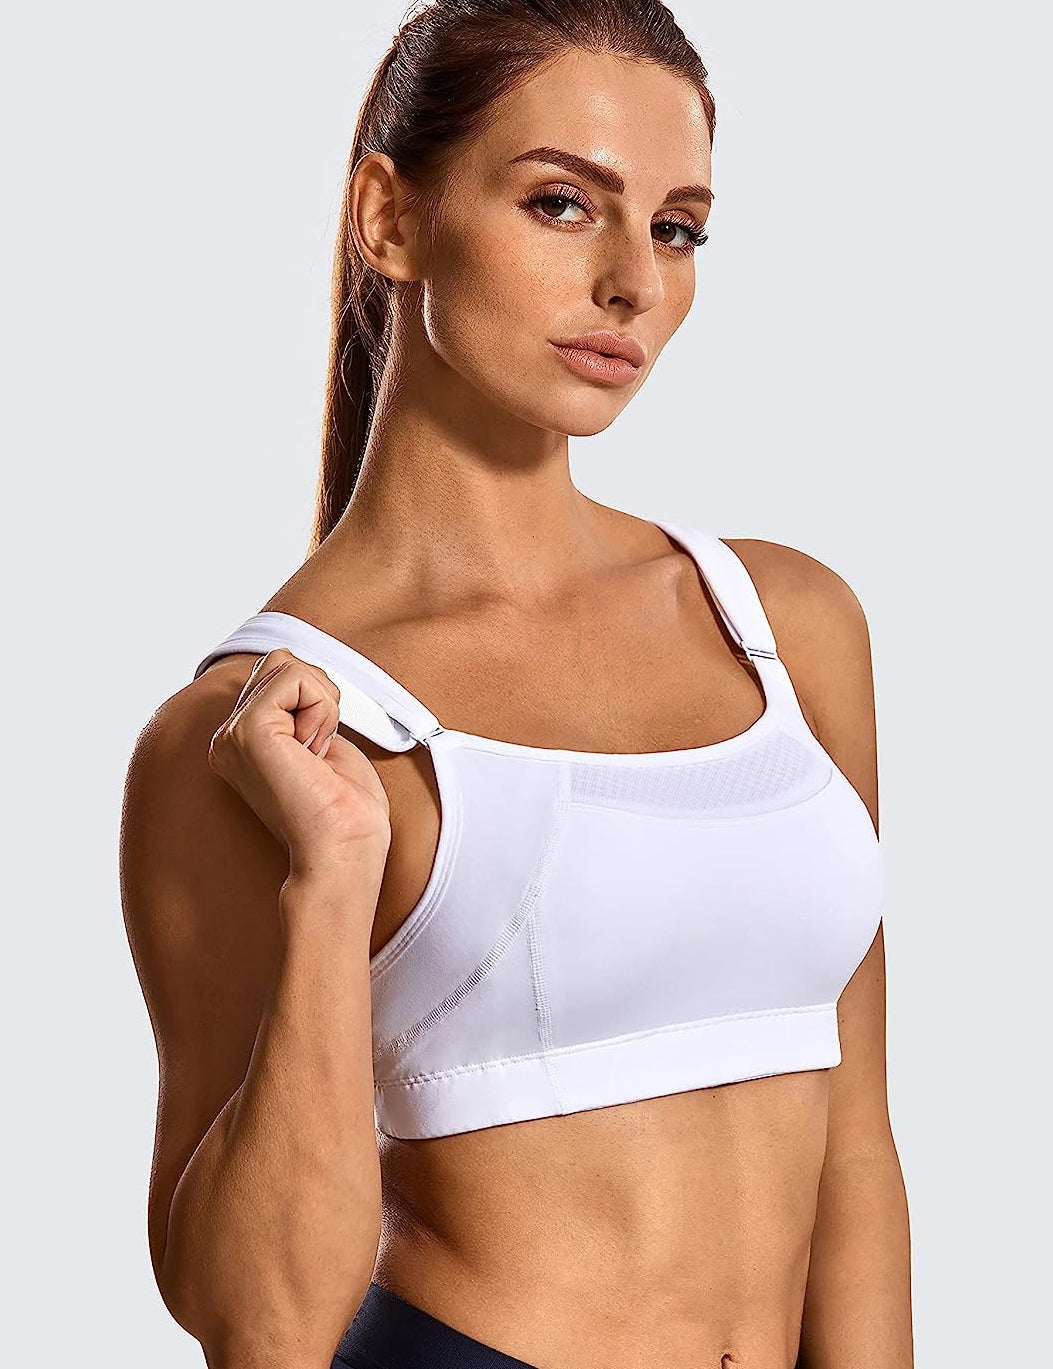 SYROKAN Women's Sports Bra High Impact Comfort Padded Wireless Supportive  Plus Size Workout Running Bras White 38E - ShopStyle